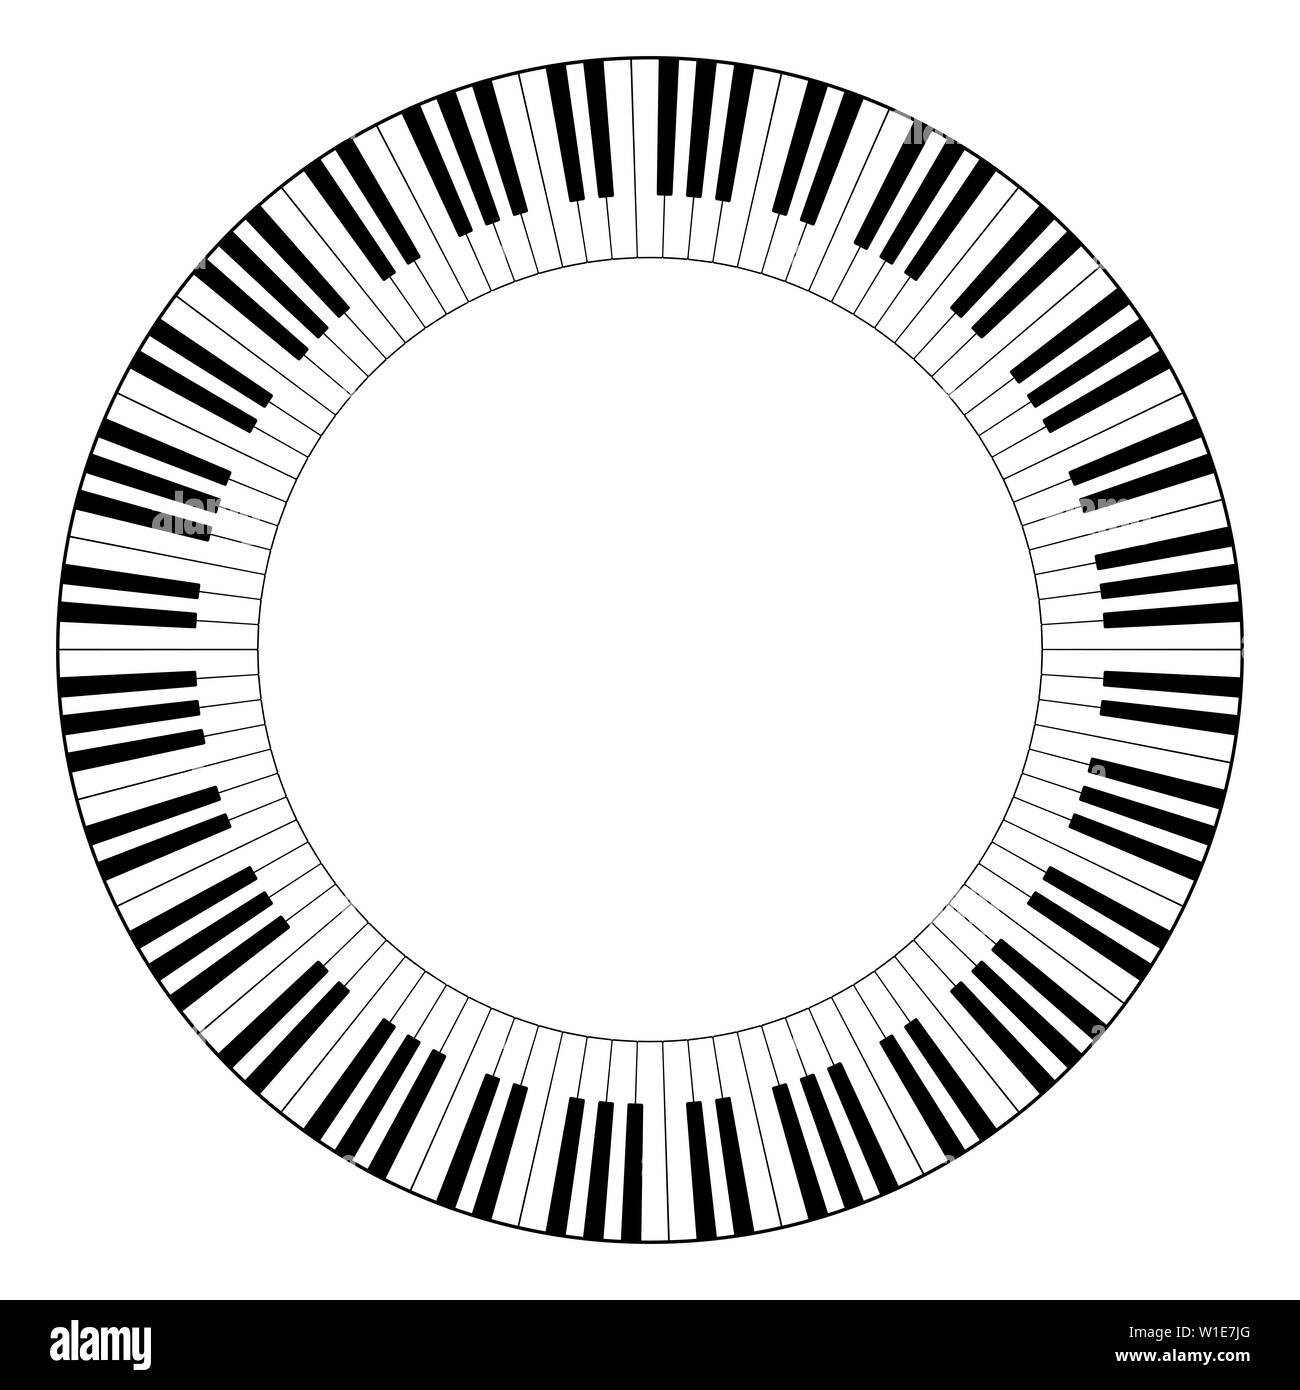 Musical keyboard circle frame, made of connected octave patterns. Decorative border, constructed from octaves, black and white keys of piano keyboard. Stock Photo